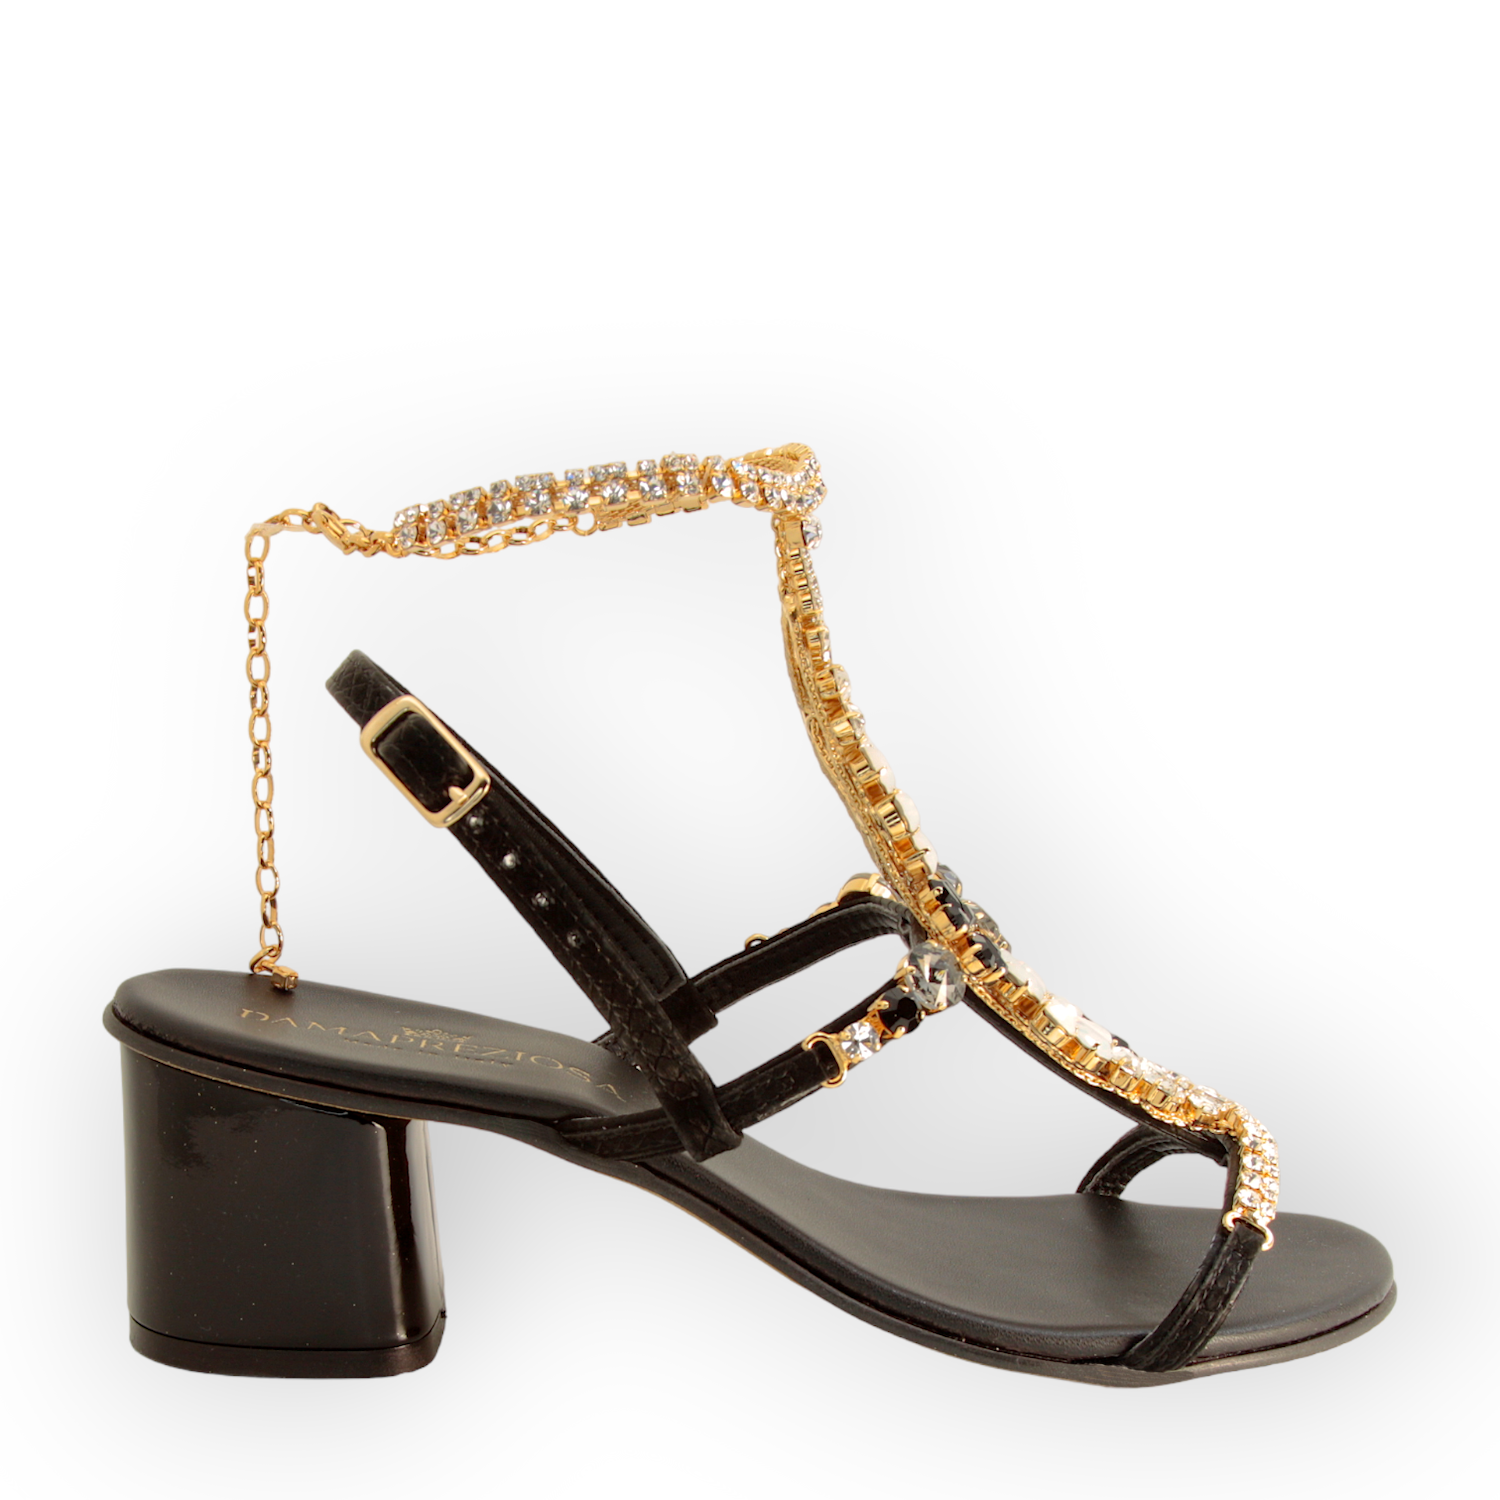 Daisy black and withe crystals embellished sandal